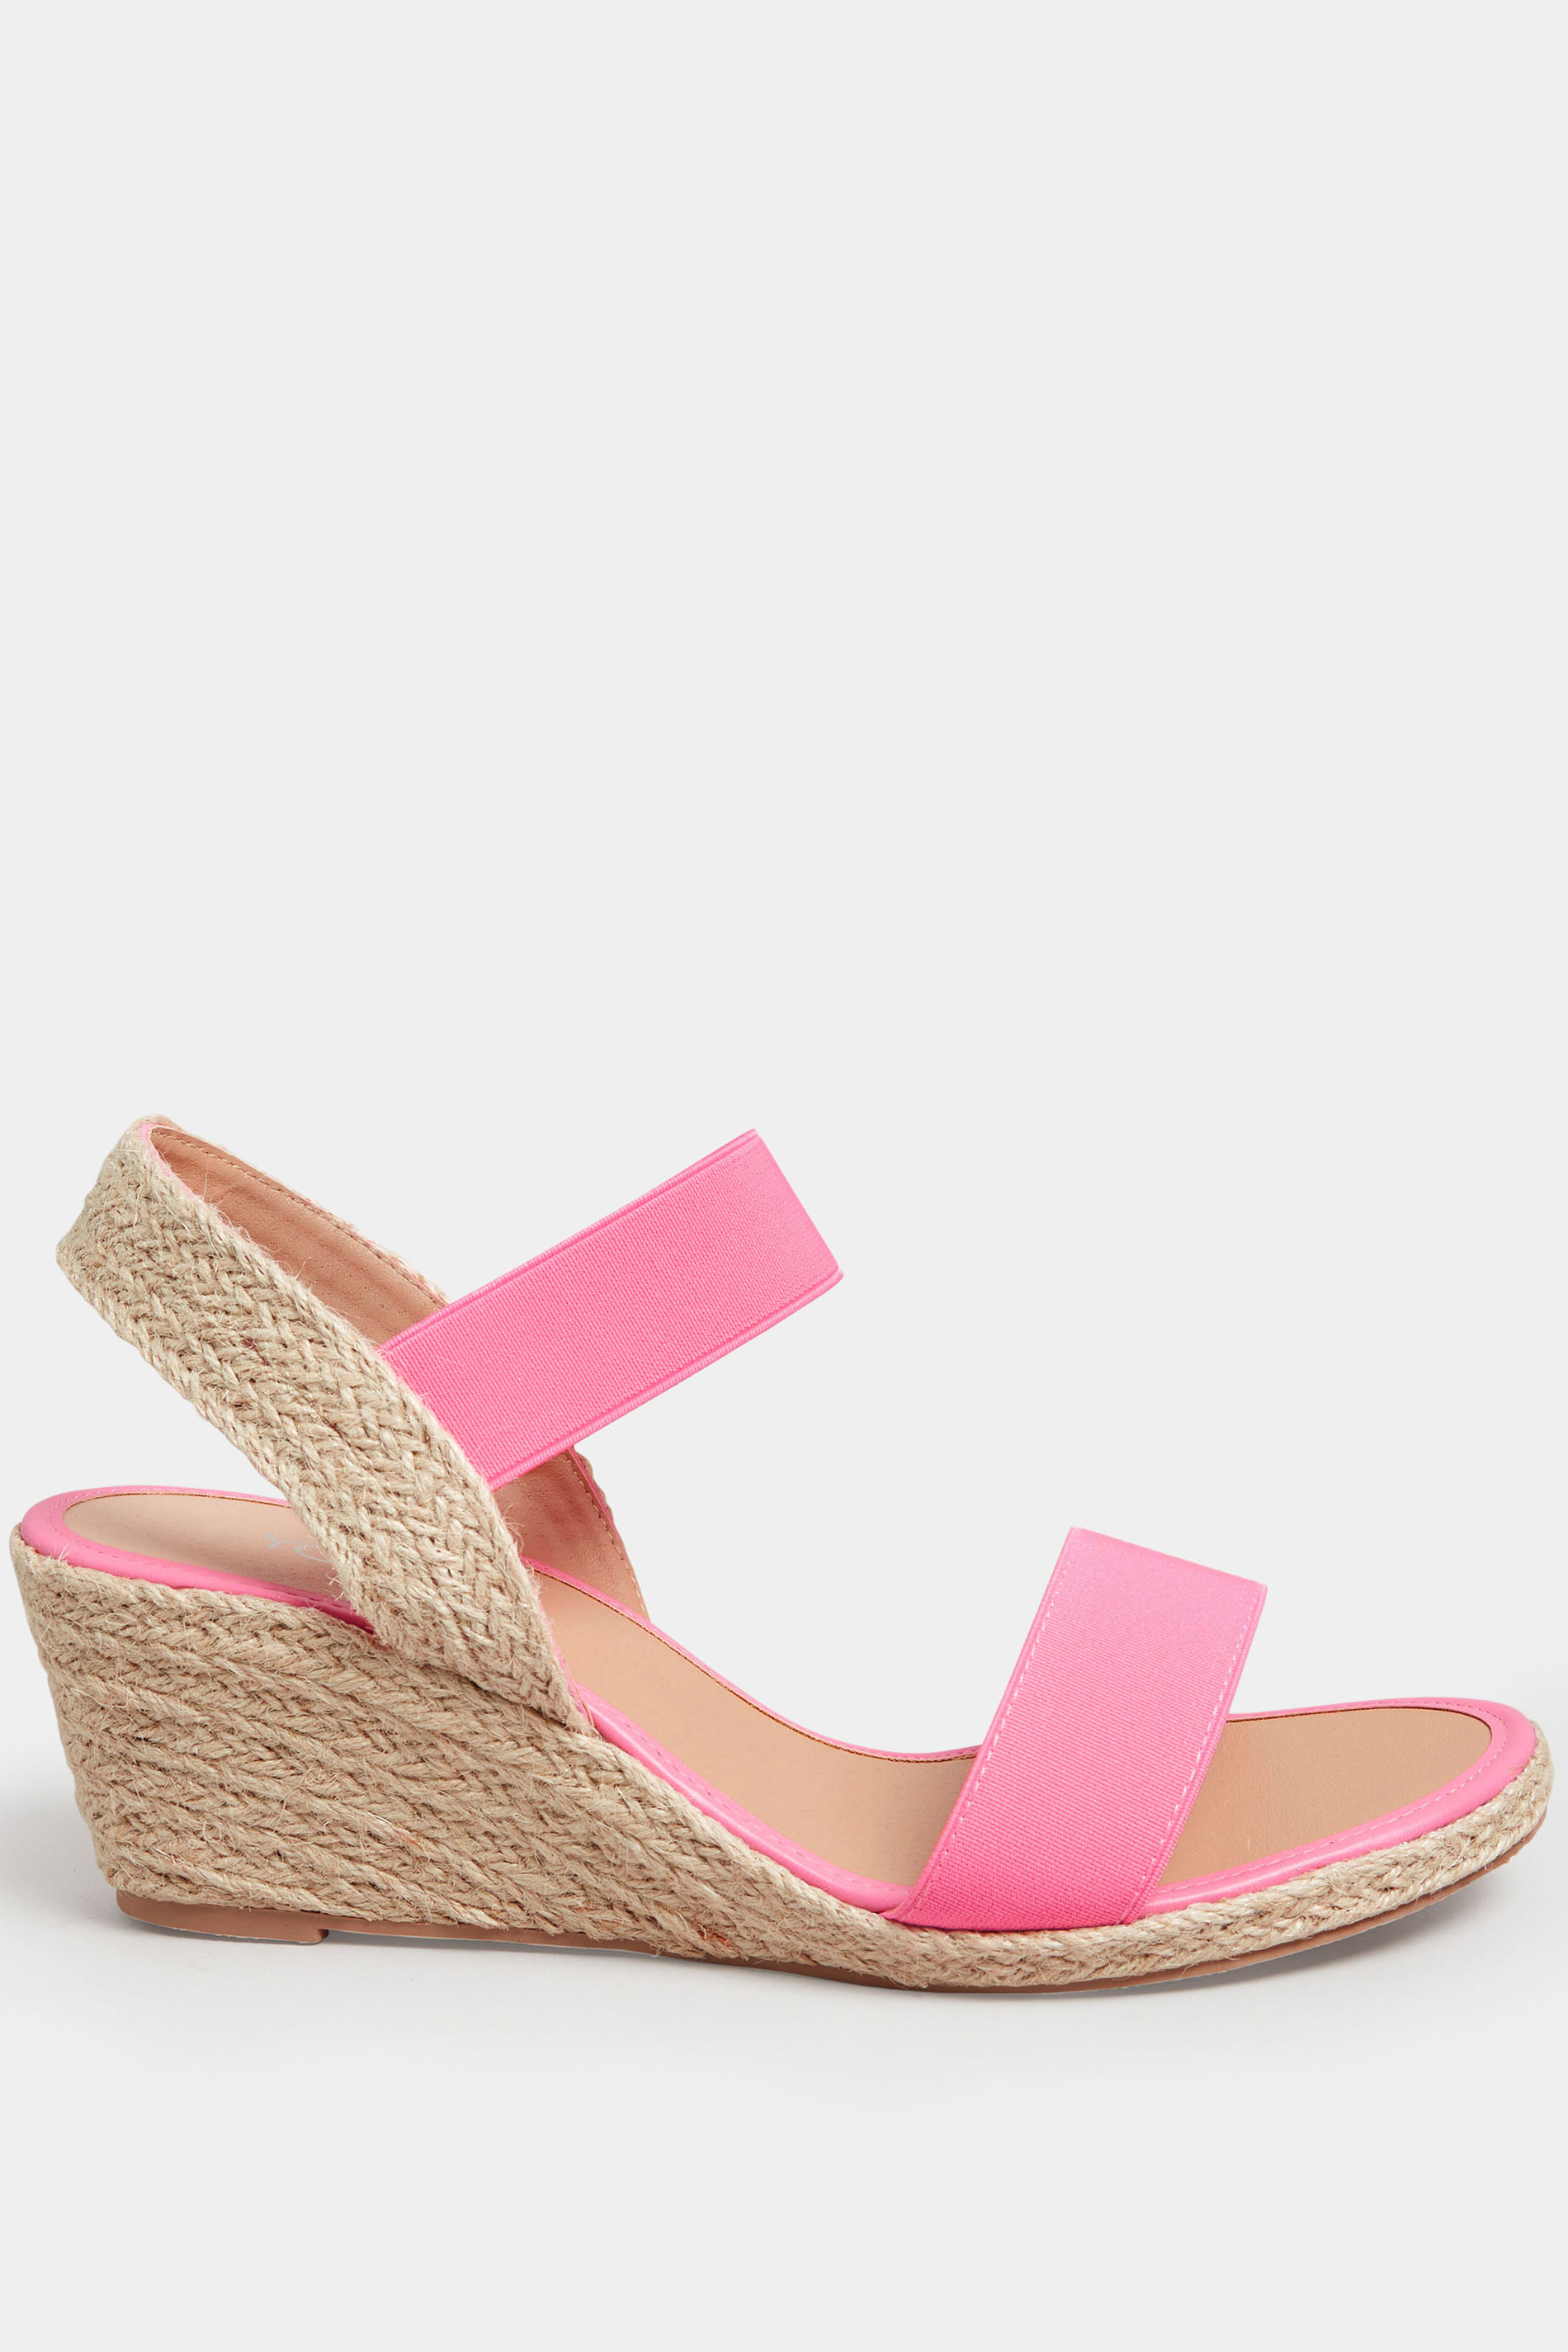 Pink Espadrille Wedges In Wide E Fit & Extra Wide EEE Fit | Yours Clothing  3